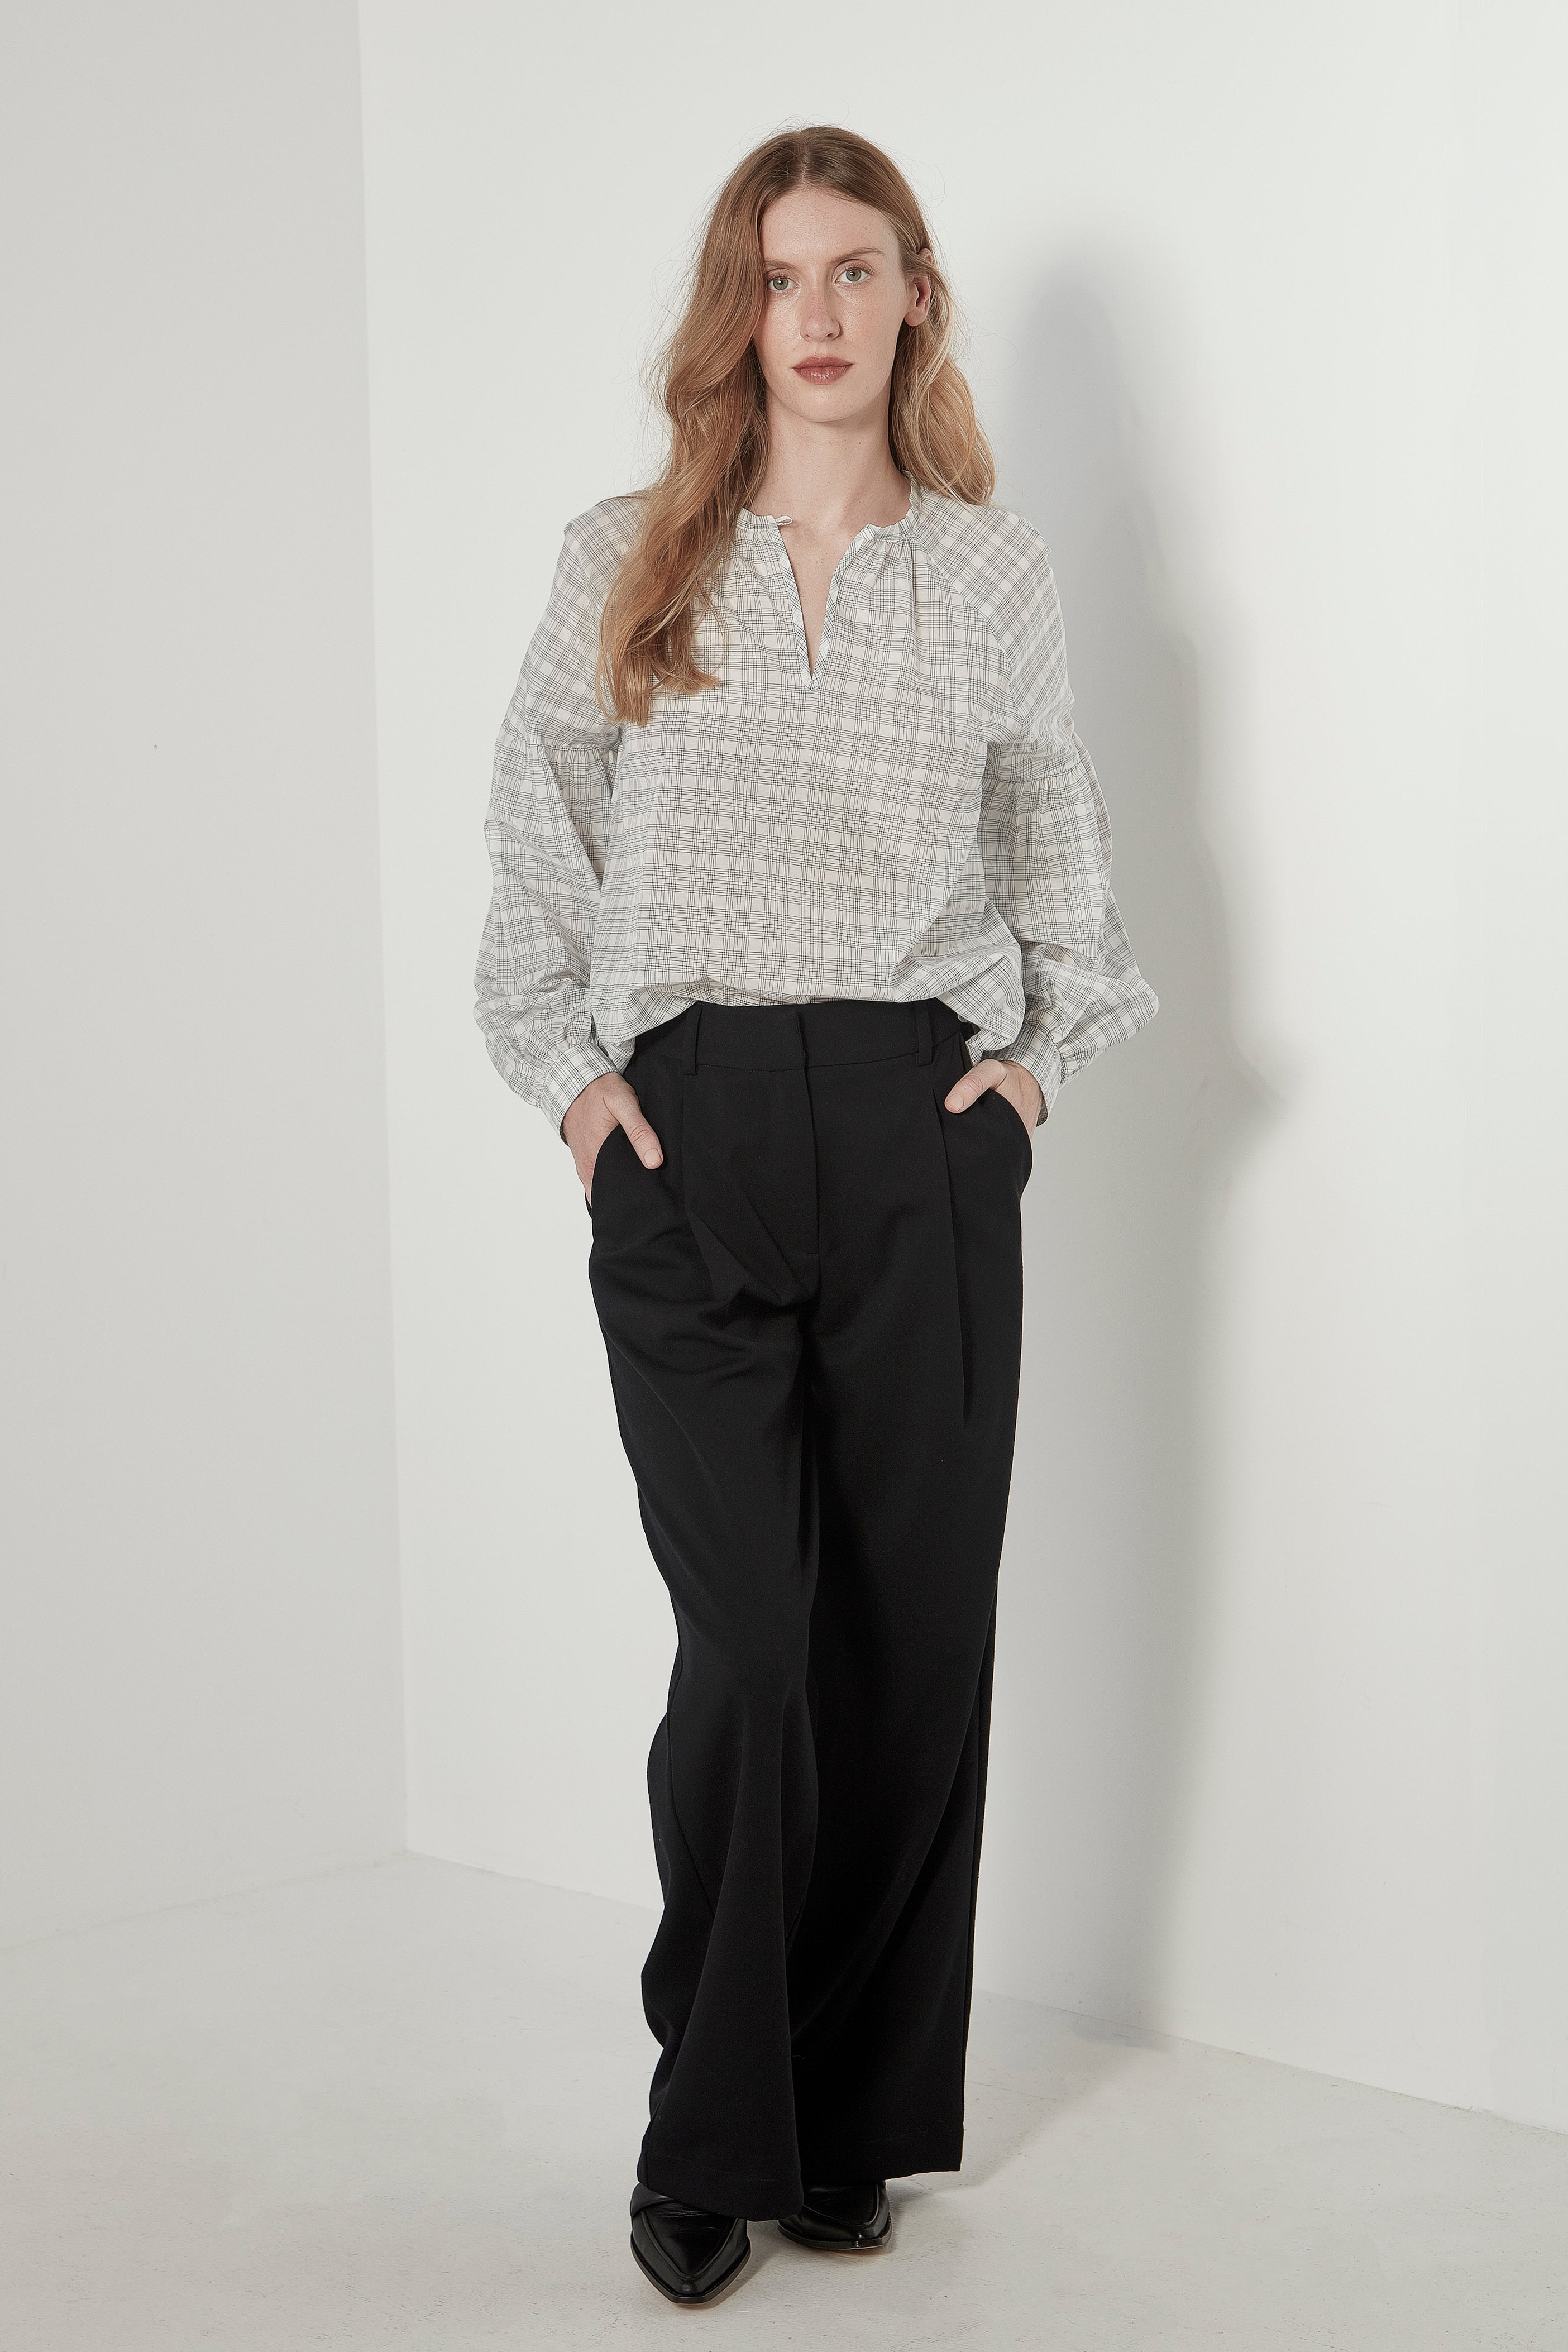 The Lantern Blouse in Check